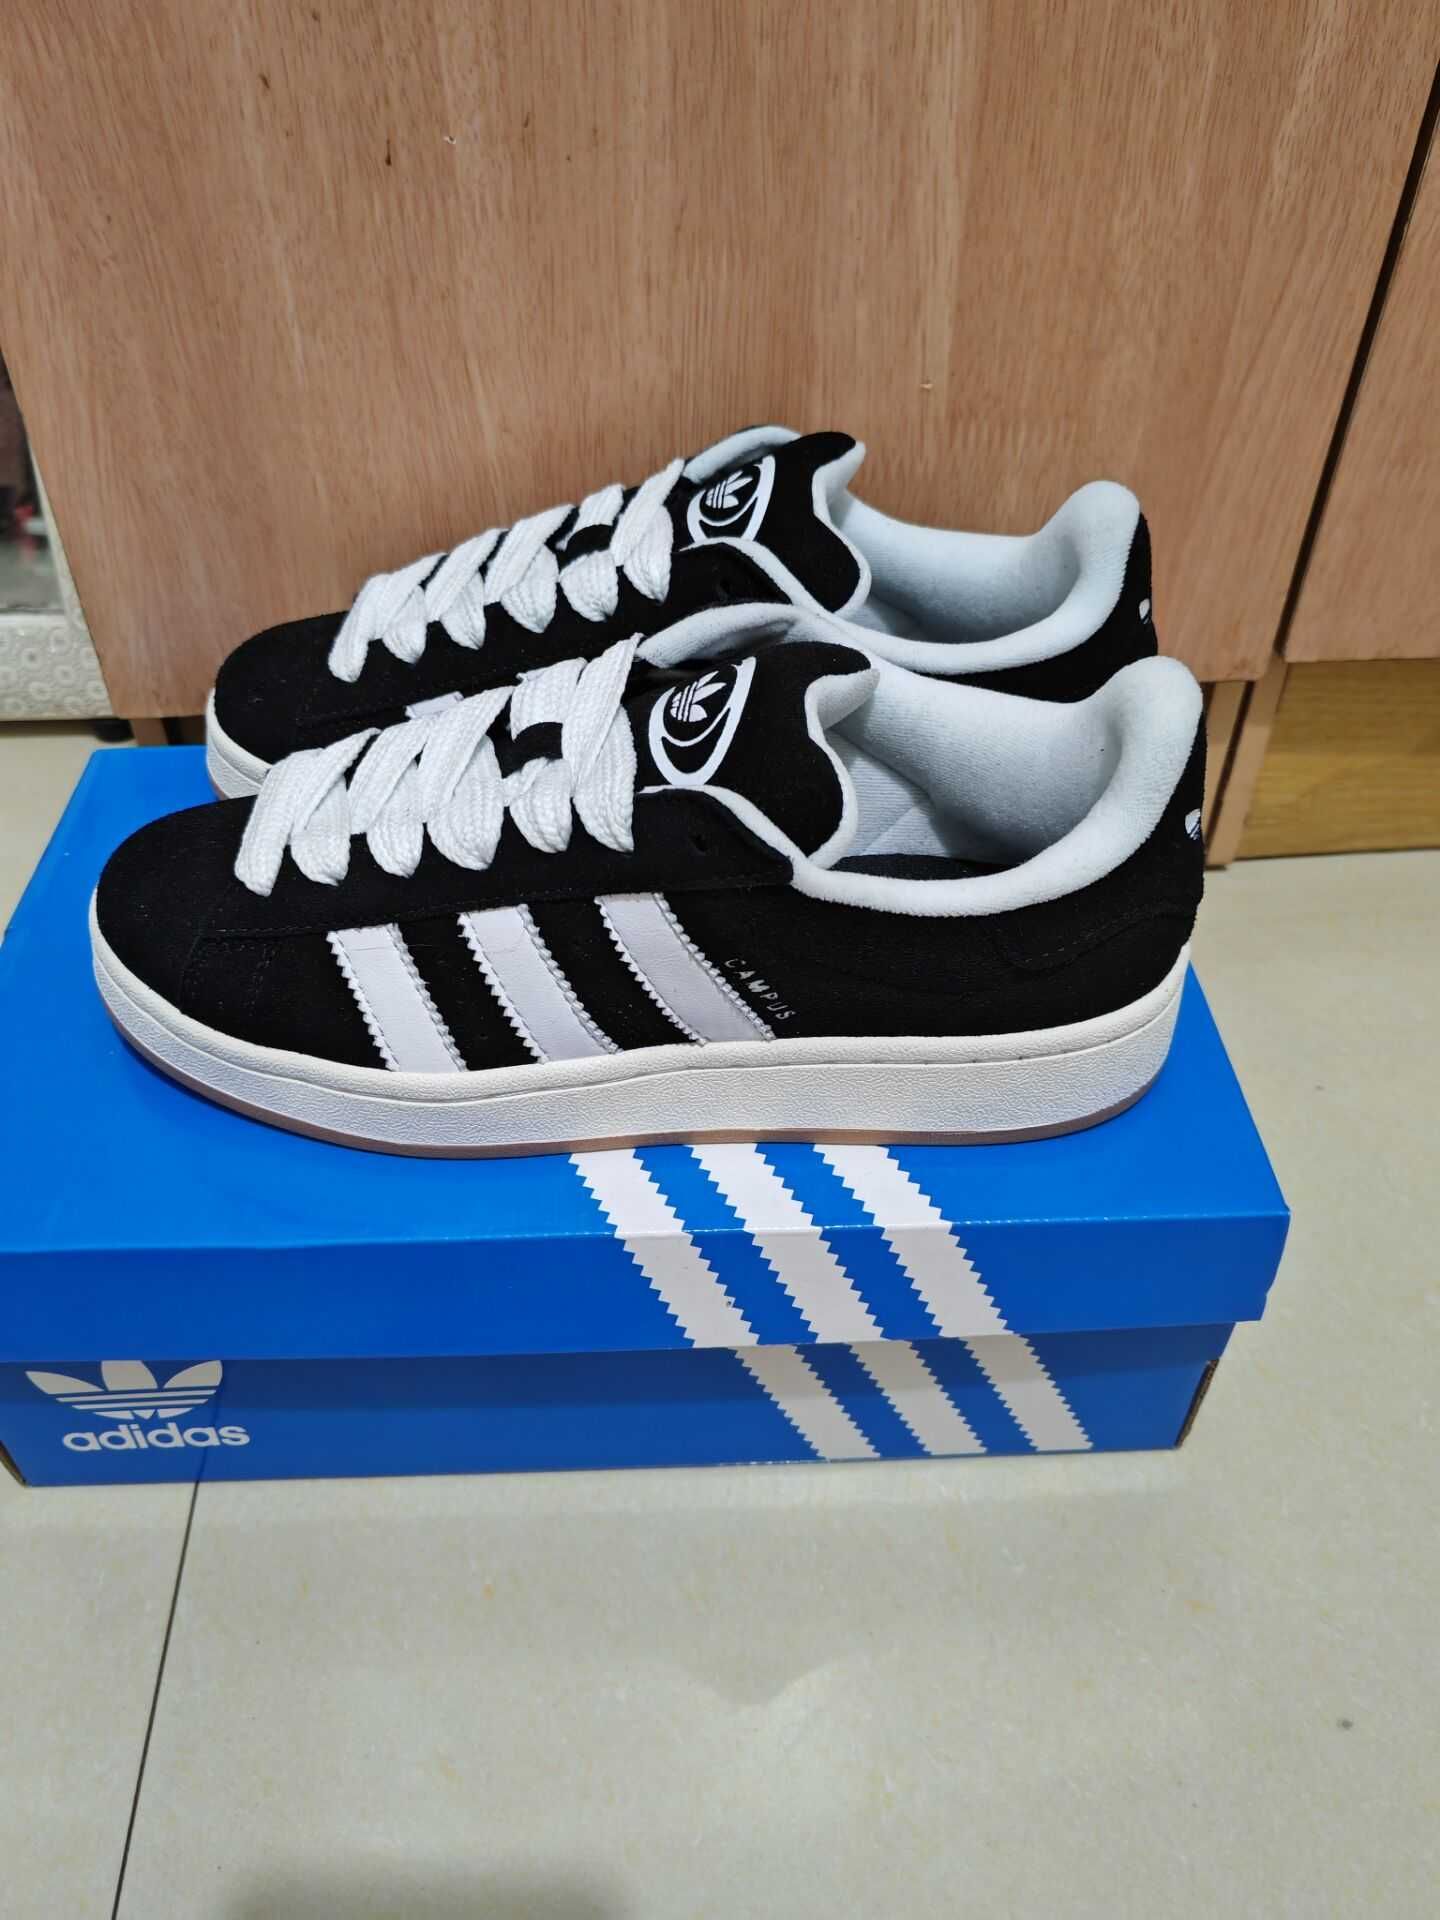 Adidas Campus 00s JG Black and White Sneakers 38